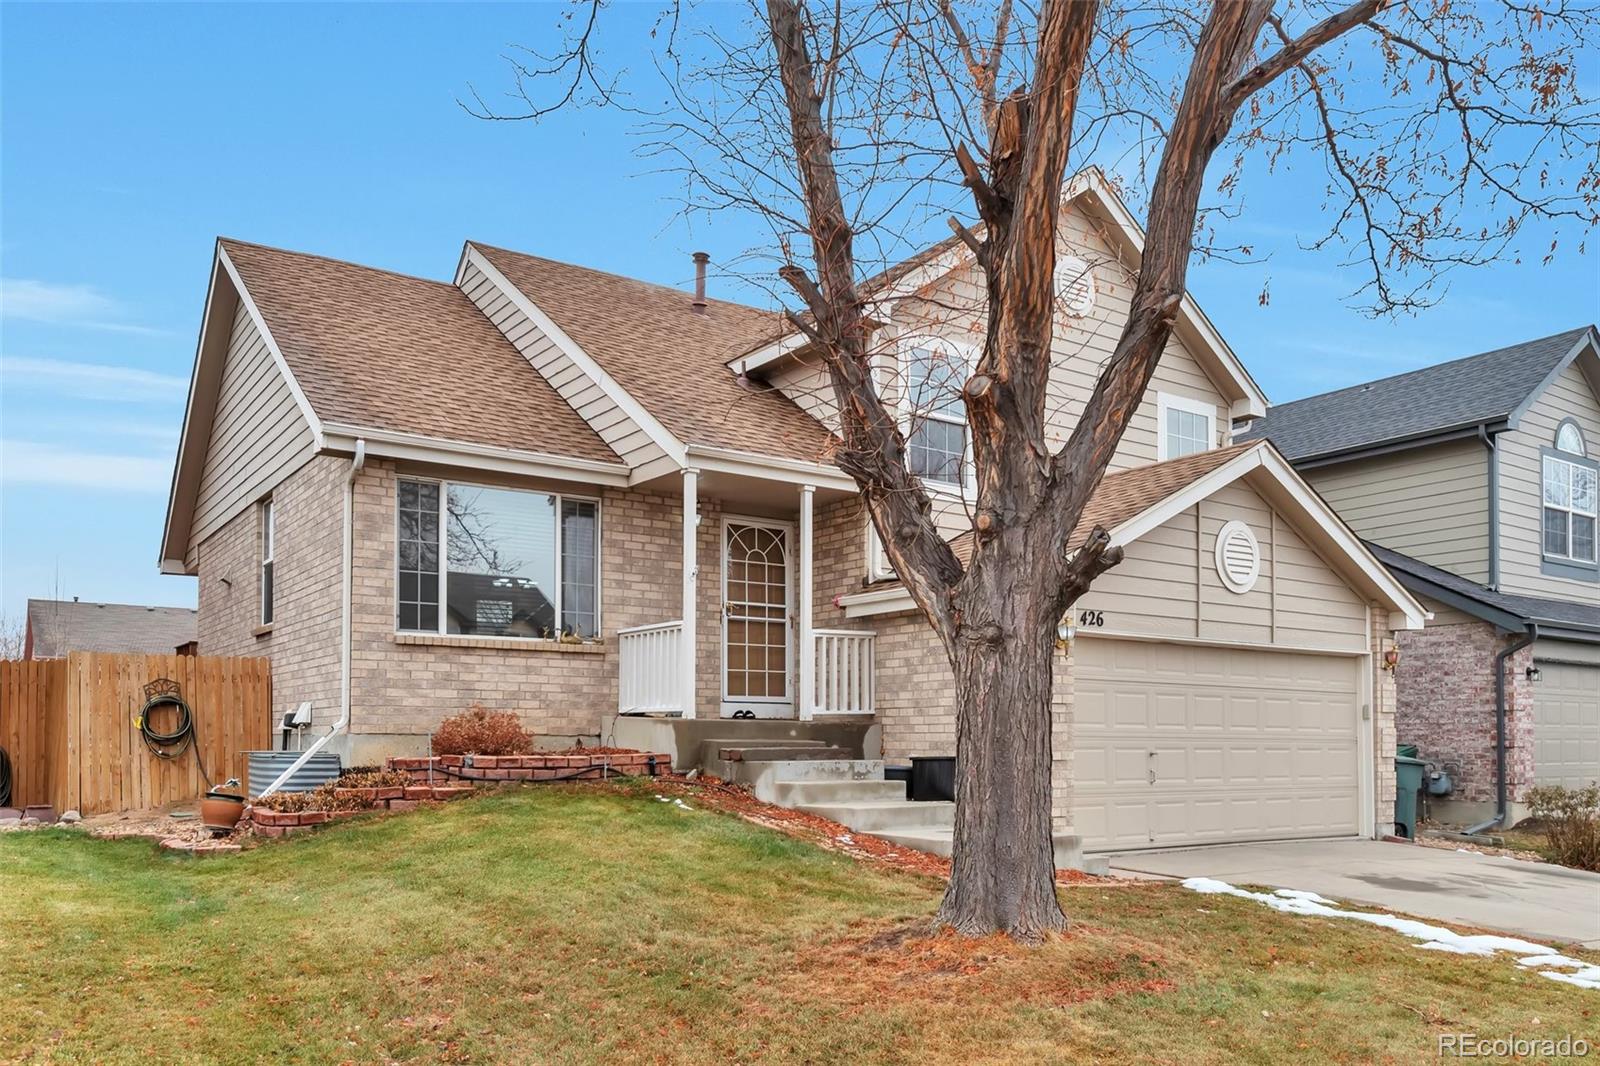 Report Image for 426 W 116th Place,Northglenn, Colorado